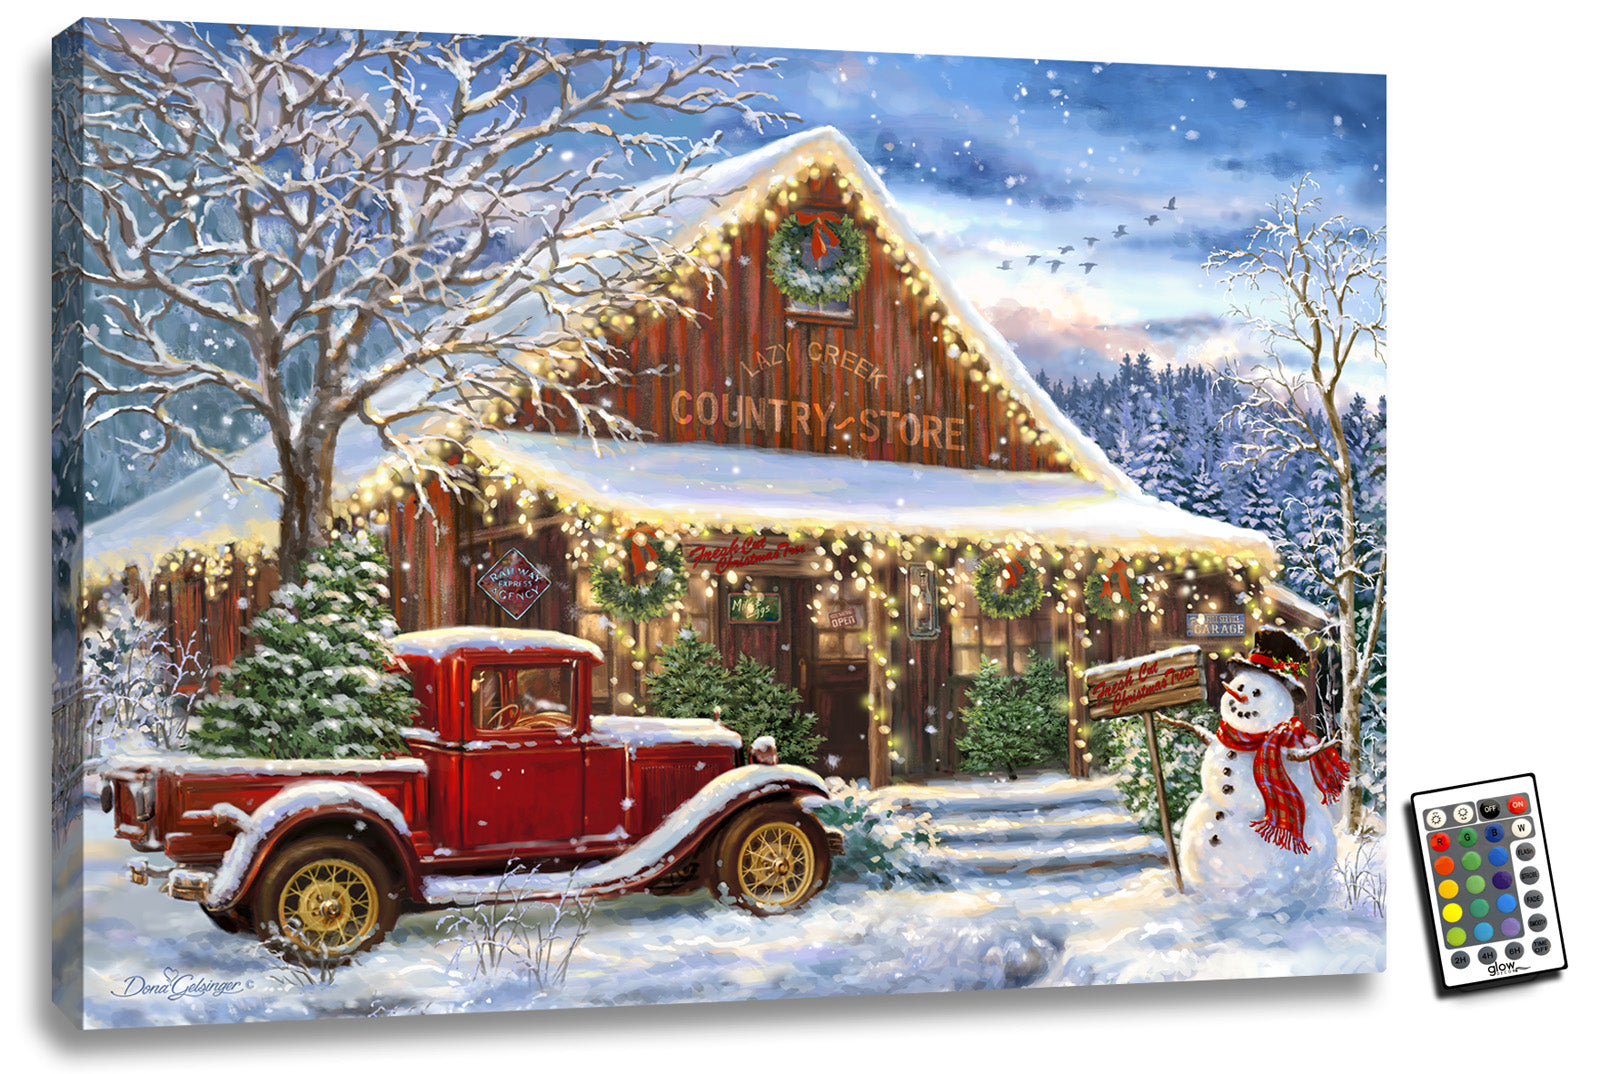 Celebrate the warmth and coziness of the holiday season with our stunning Country Store Christmas illuminated LED Wall art! Featuring an old-fashioned red truck parked in front of a charming, well-maintained wooden country store, this piece captures the spirit of a bygone era.